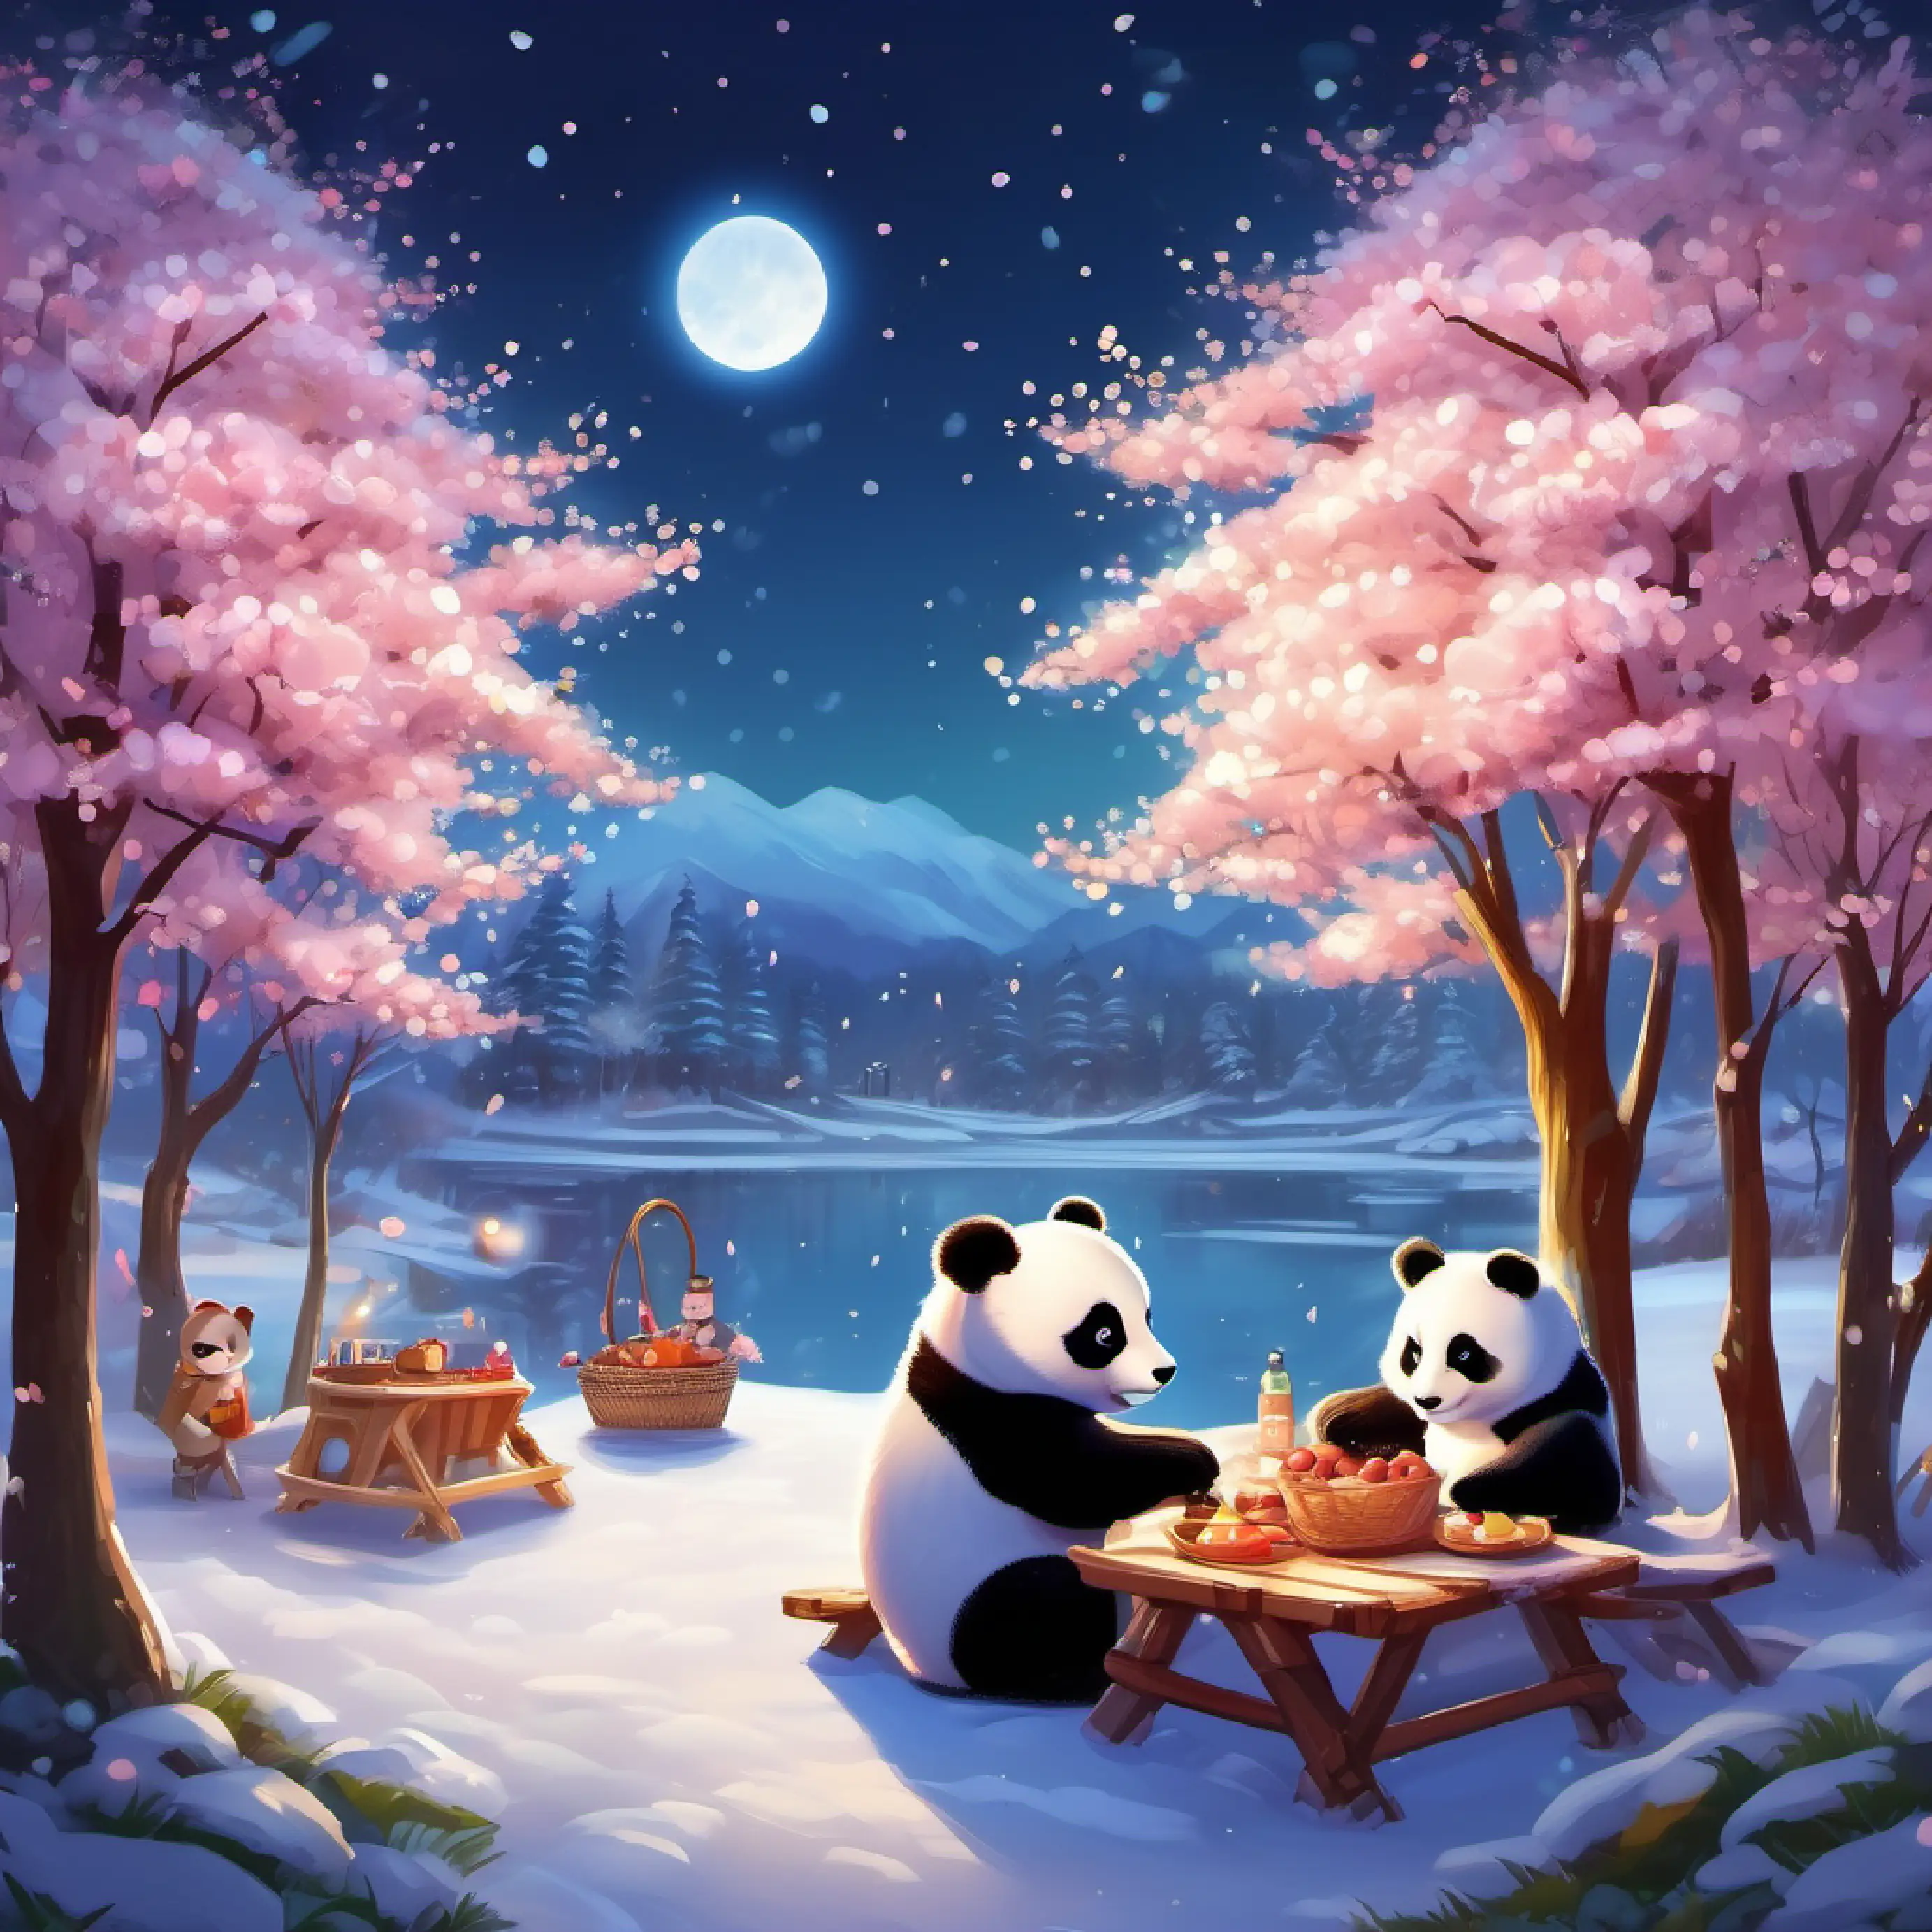 Snow-covered landscape with twinkling LED lights, cherry blossoms, and two fluffy baby pandas having a picnic.